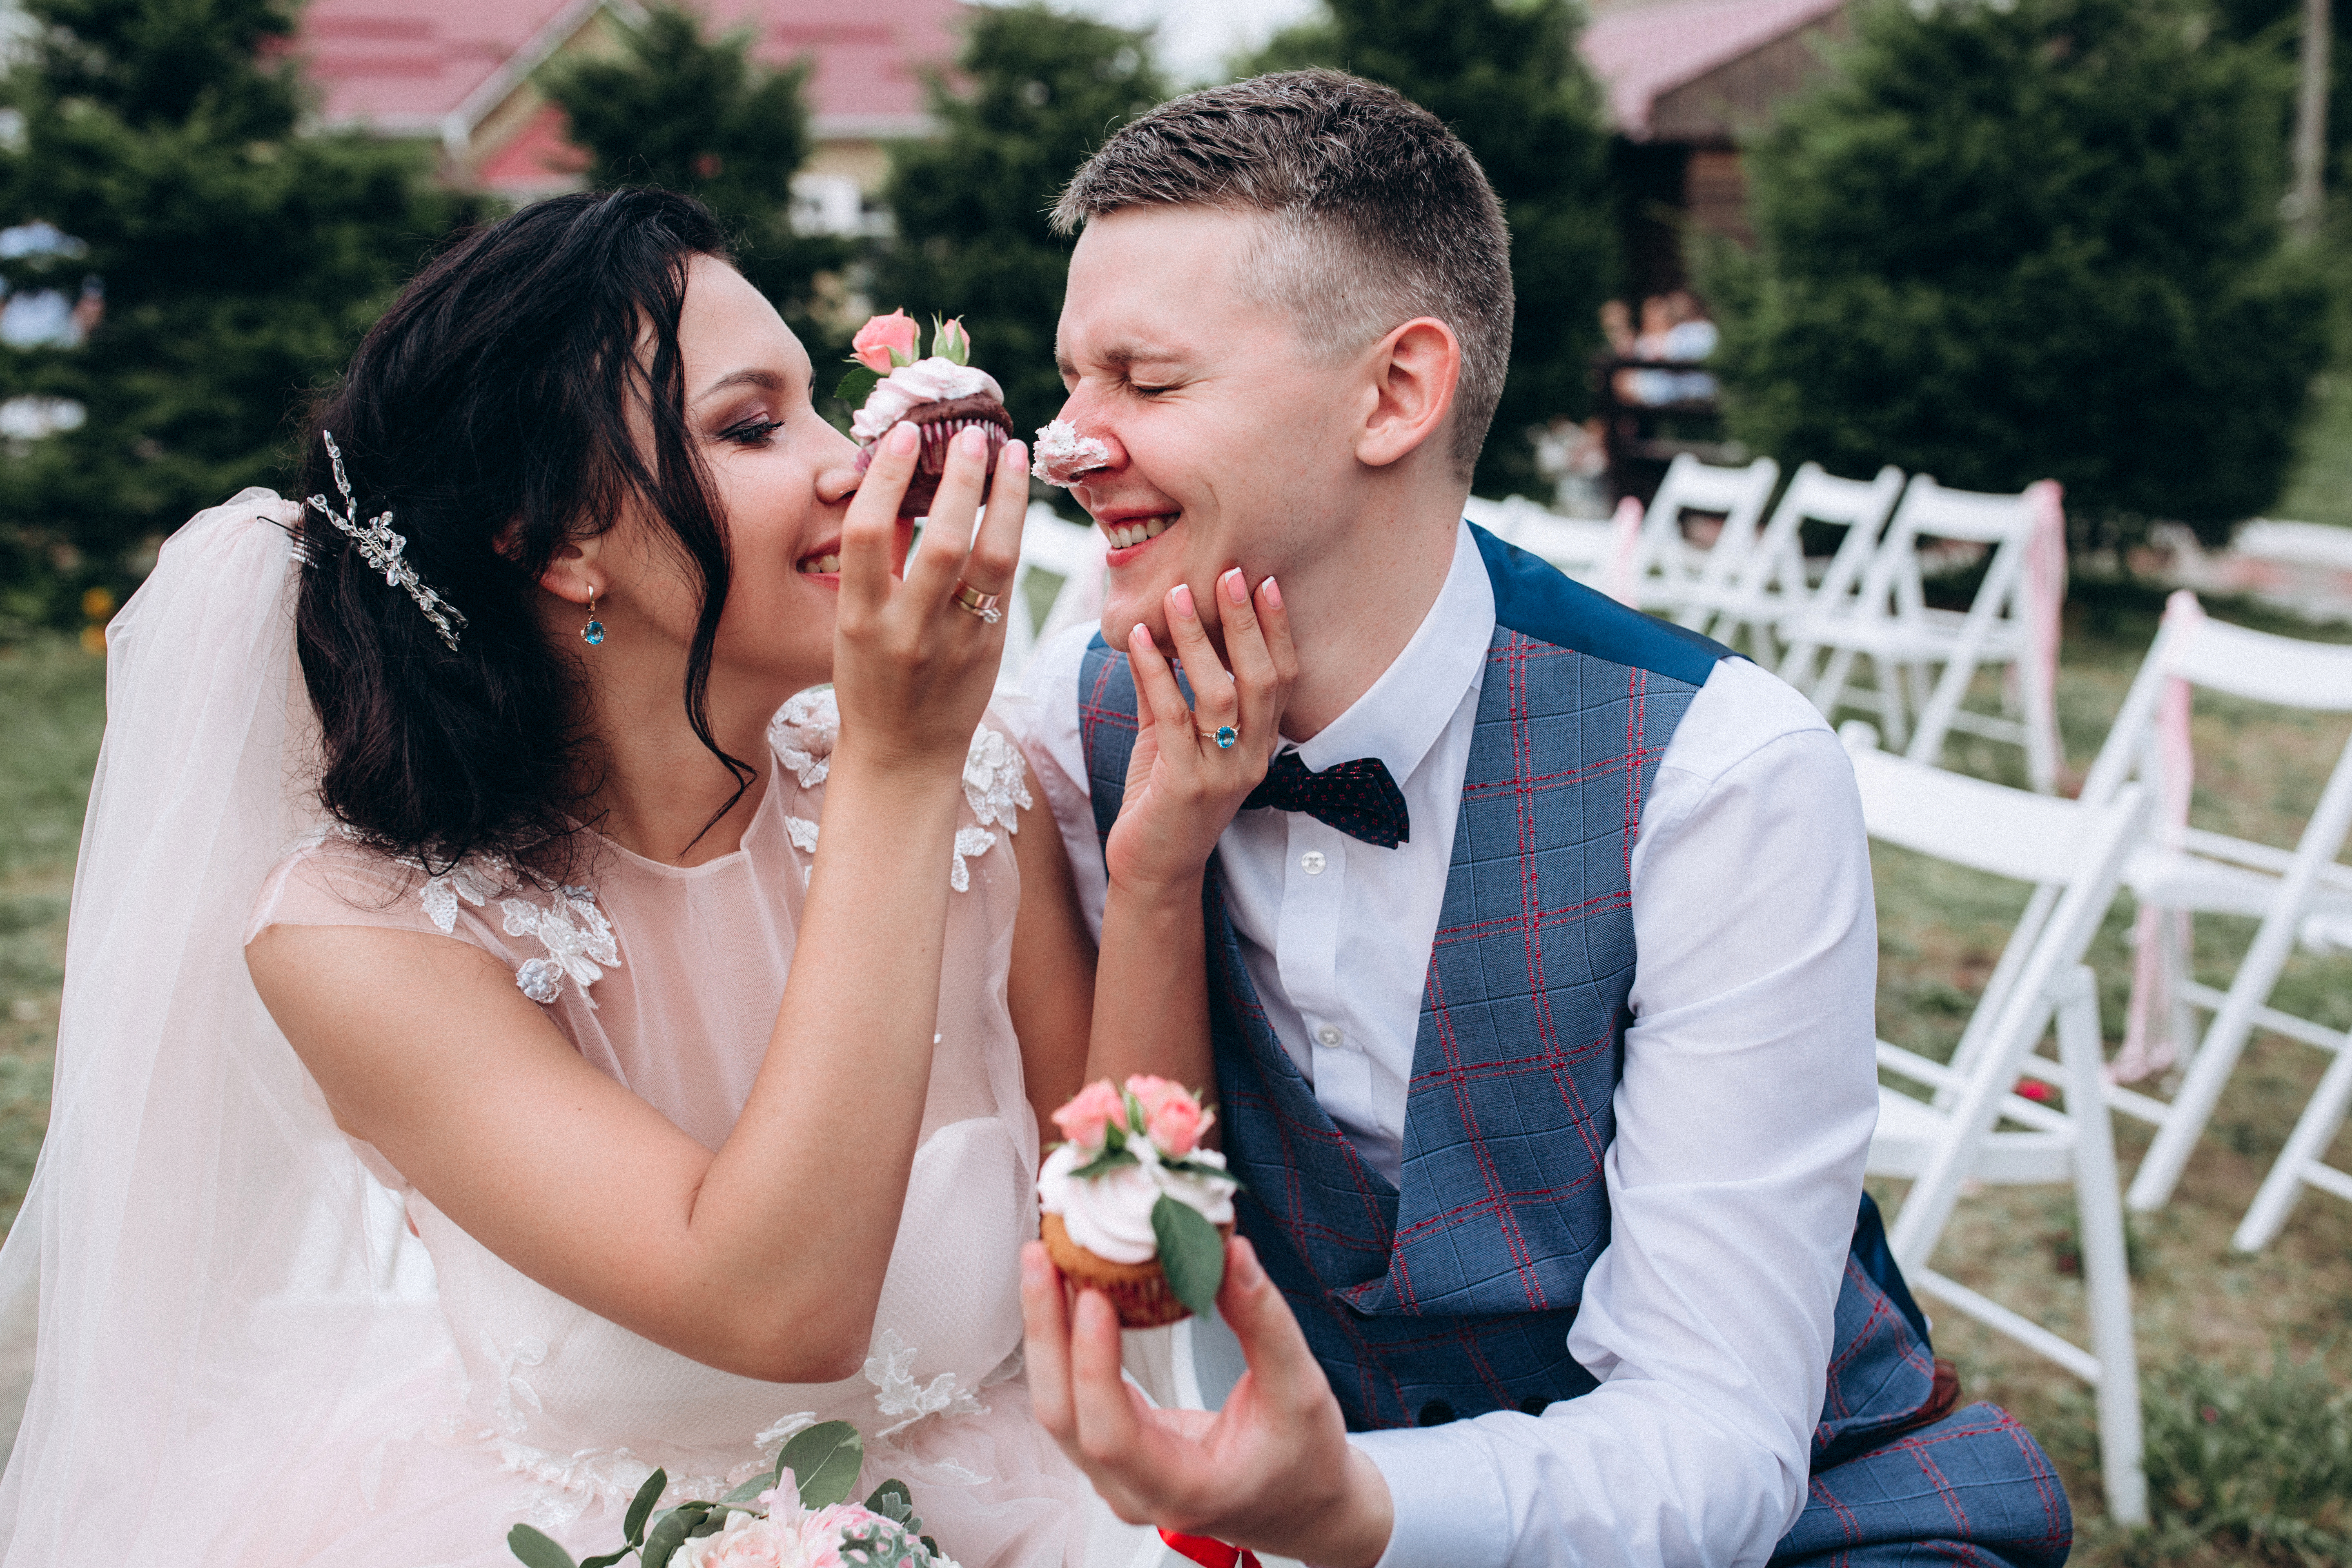 Bride placing icing on groom's nose | Source: Shutterstock